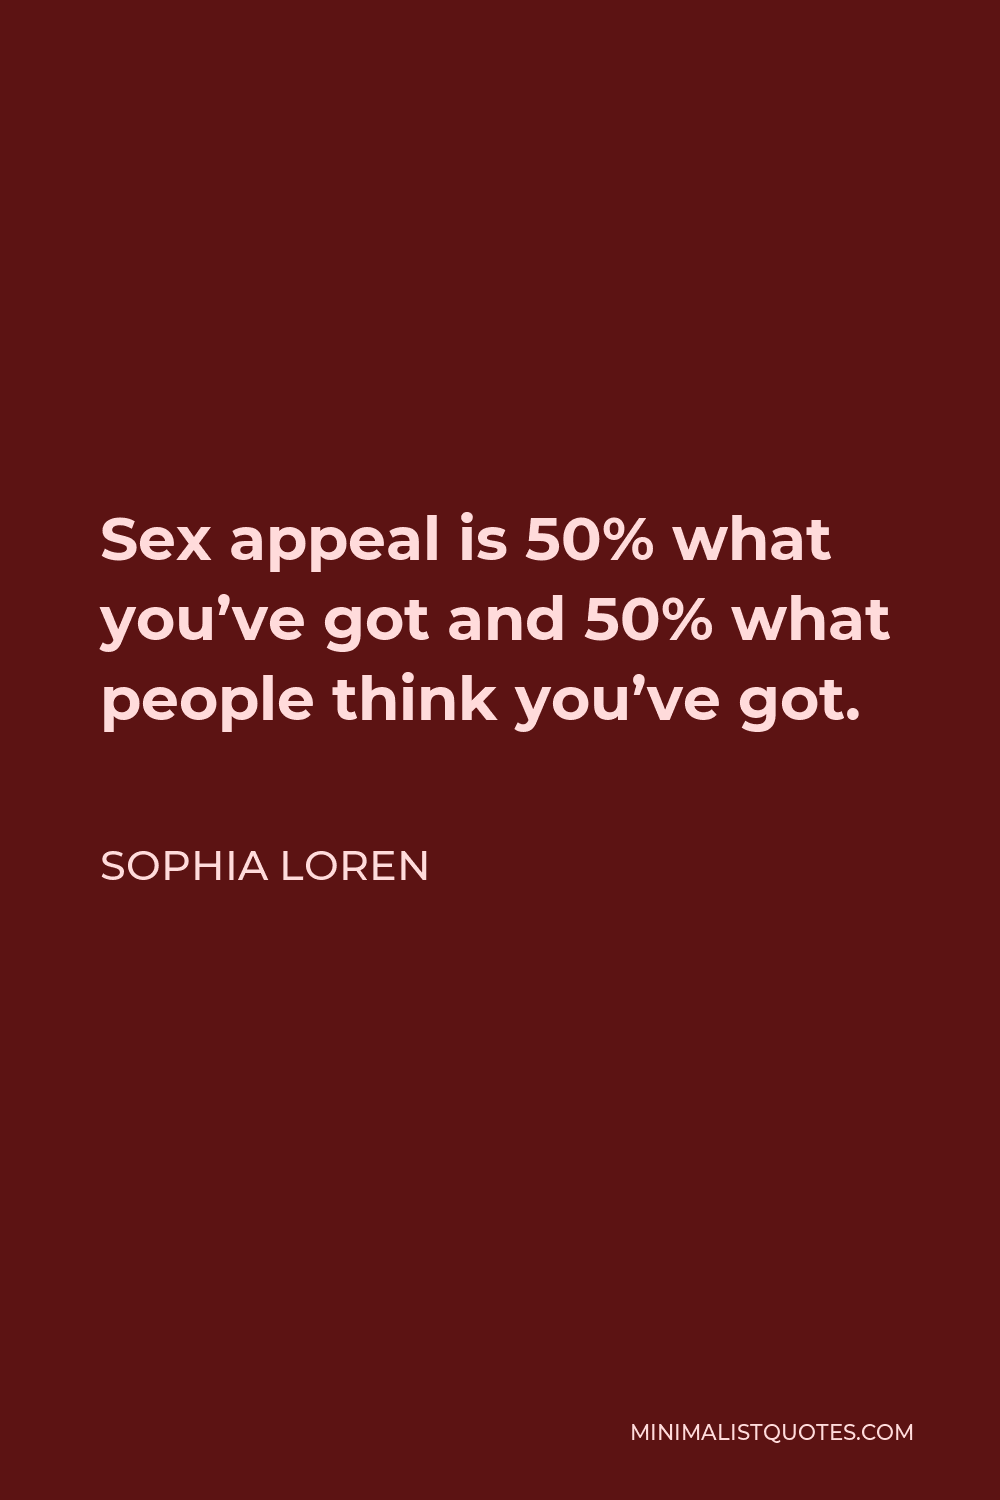 Sophia Loren Quote - Sex appeal is 50% what you’ve got and 50% what people think you’ve got.